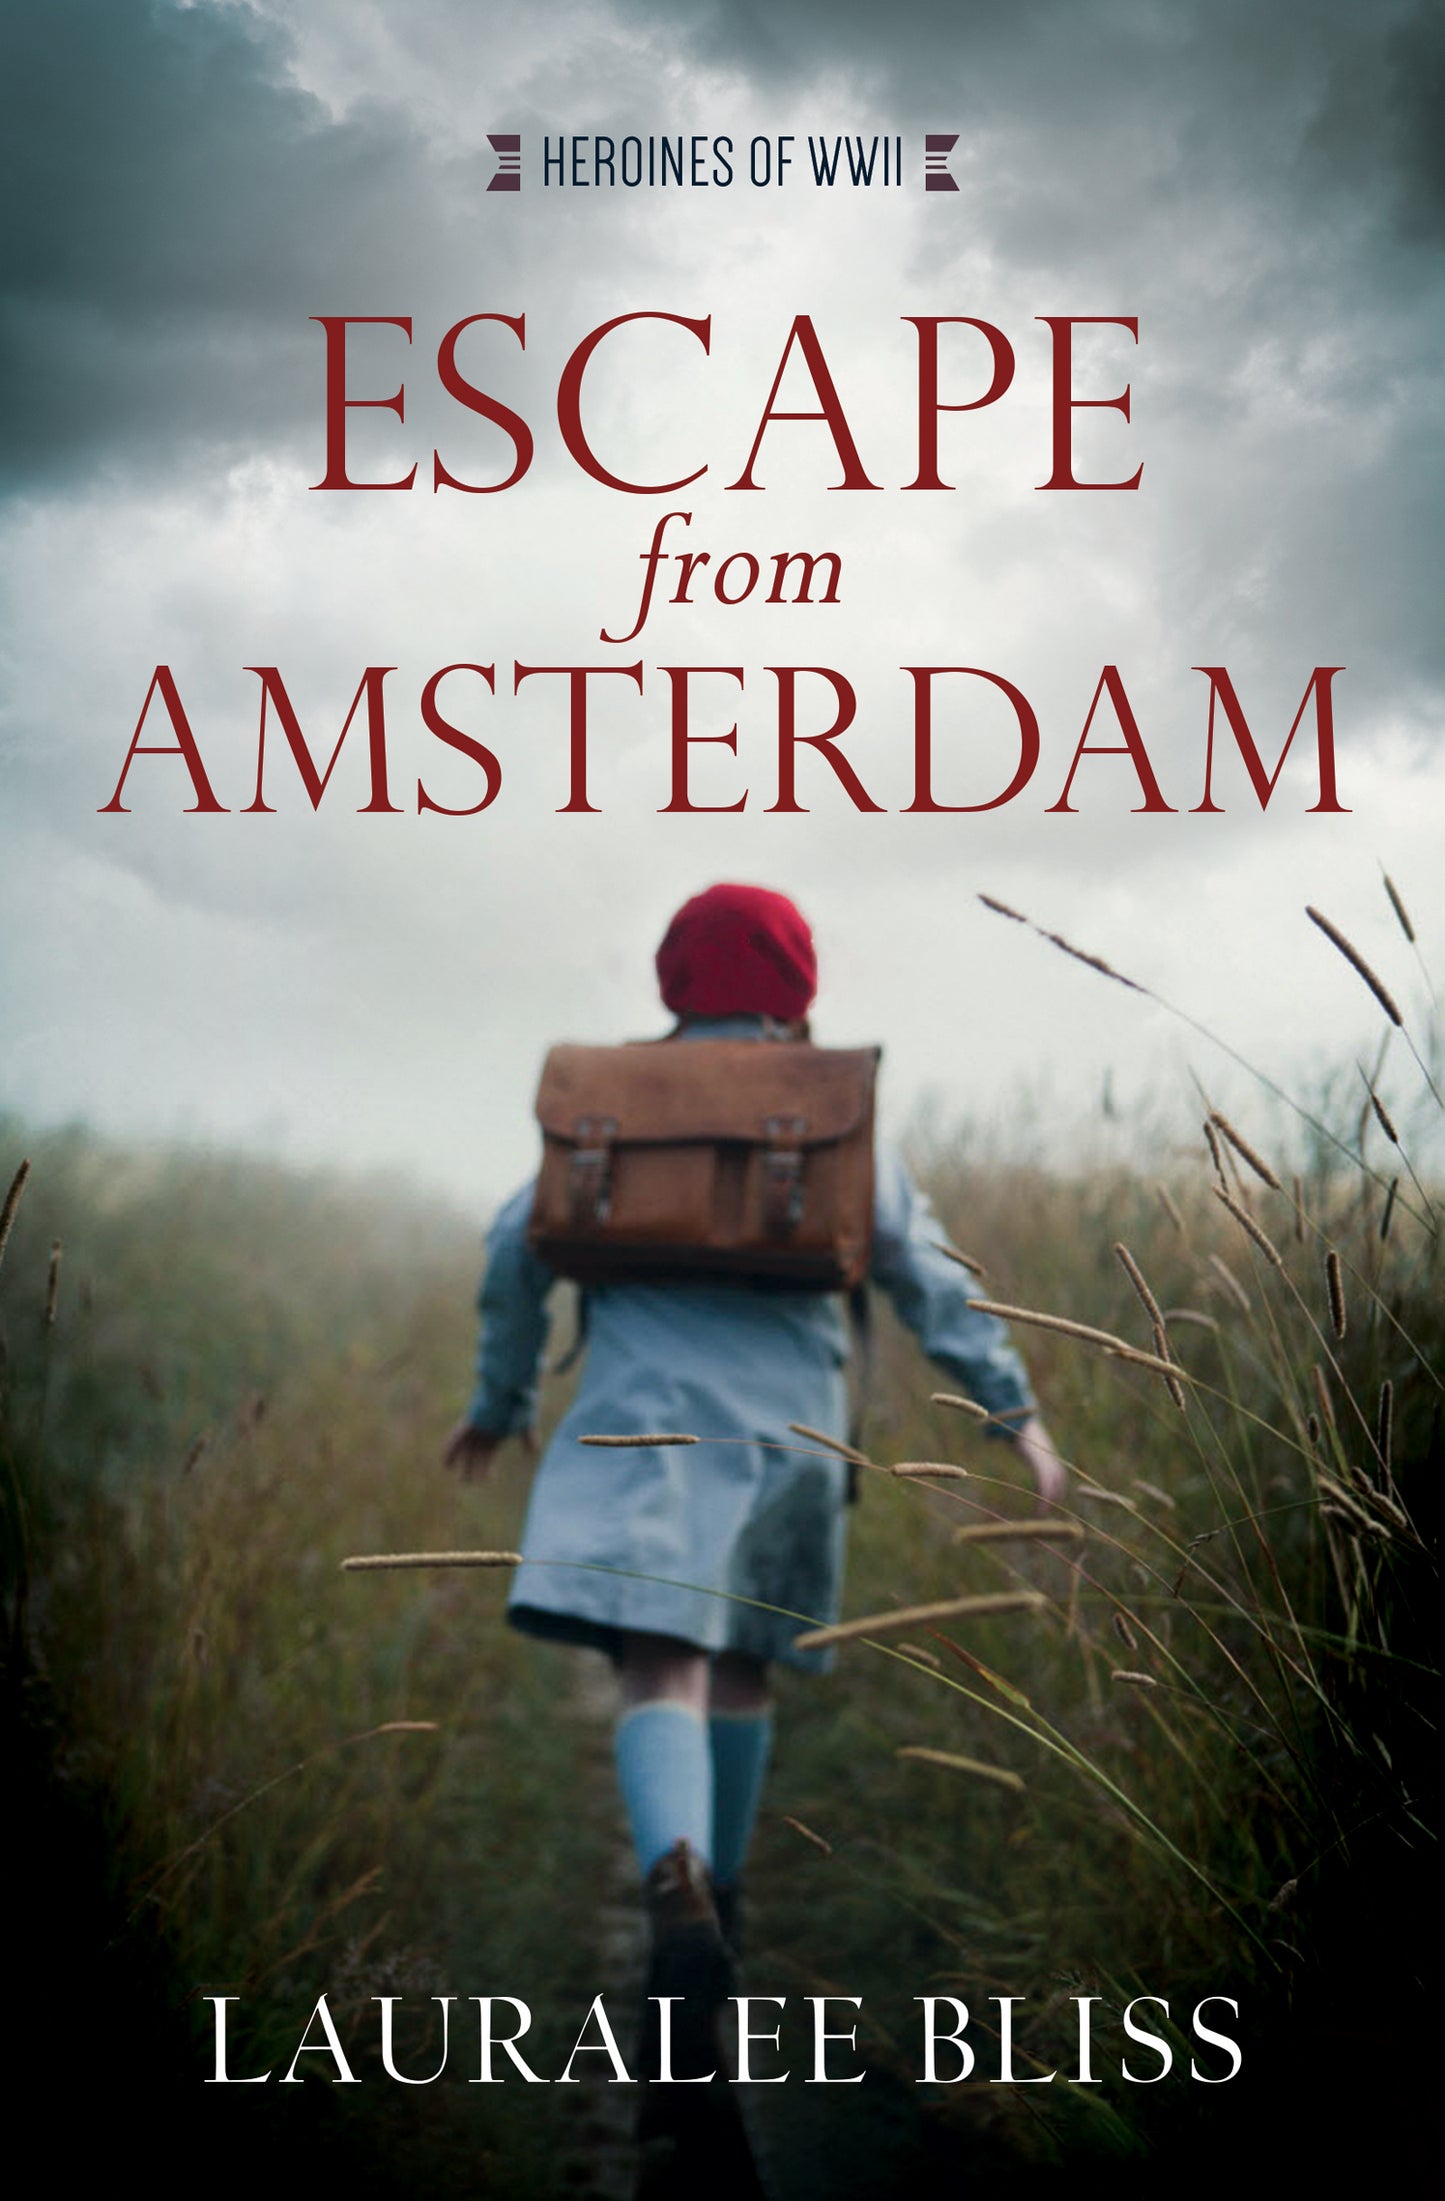 Escape from Amsterdam - The Christian Gift Company